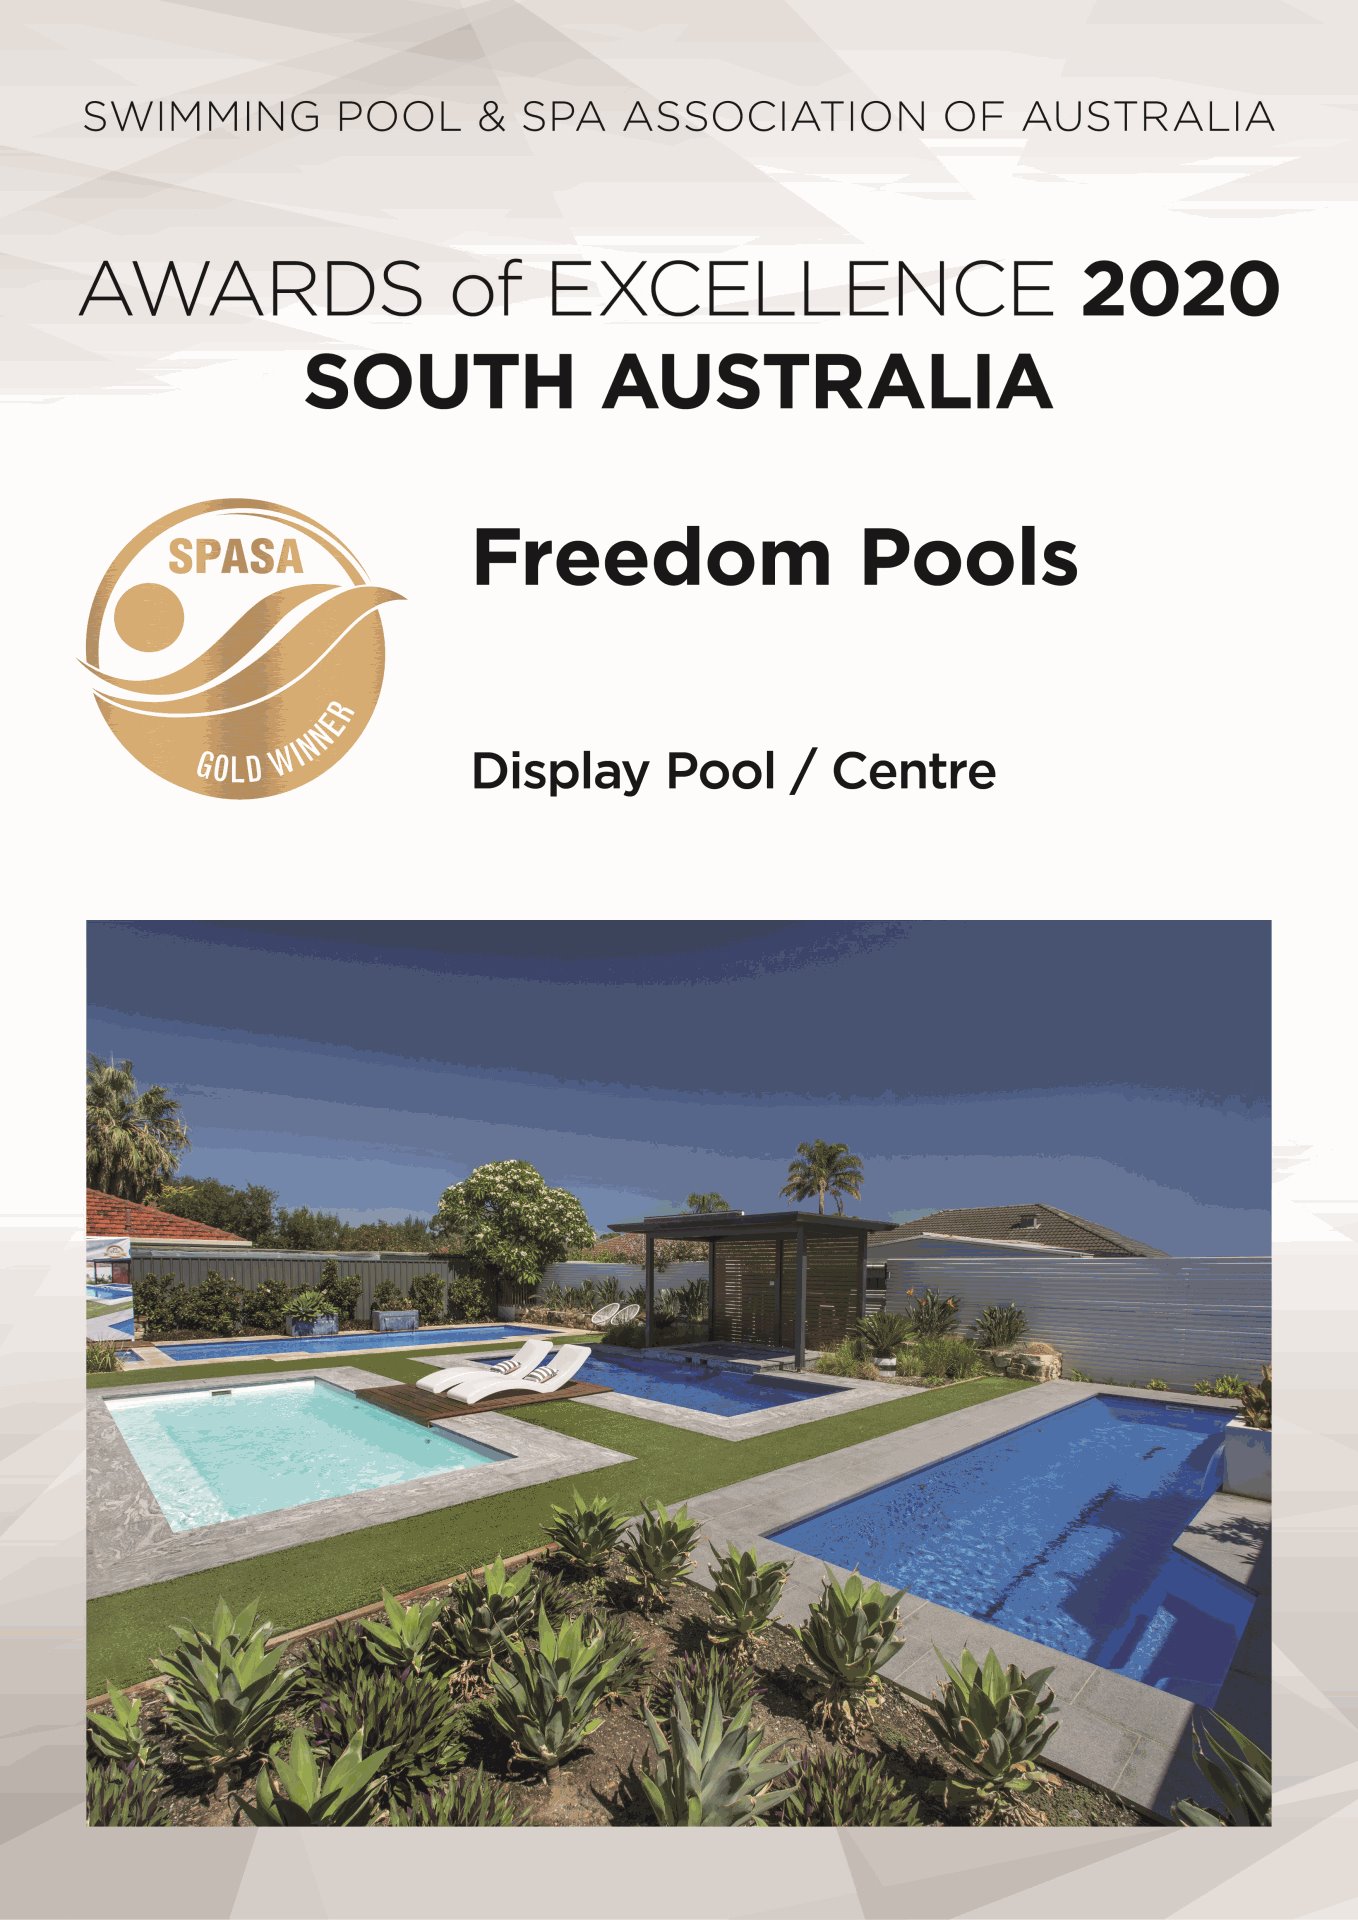 Freedom Pools has just won 14 AWARDS at the 2020 SPASA AWARDS for swimming pool design excellence